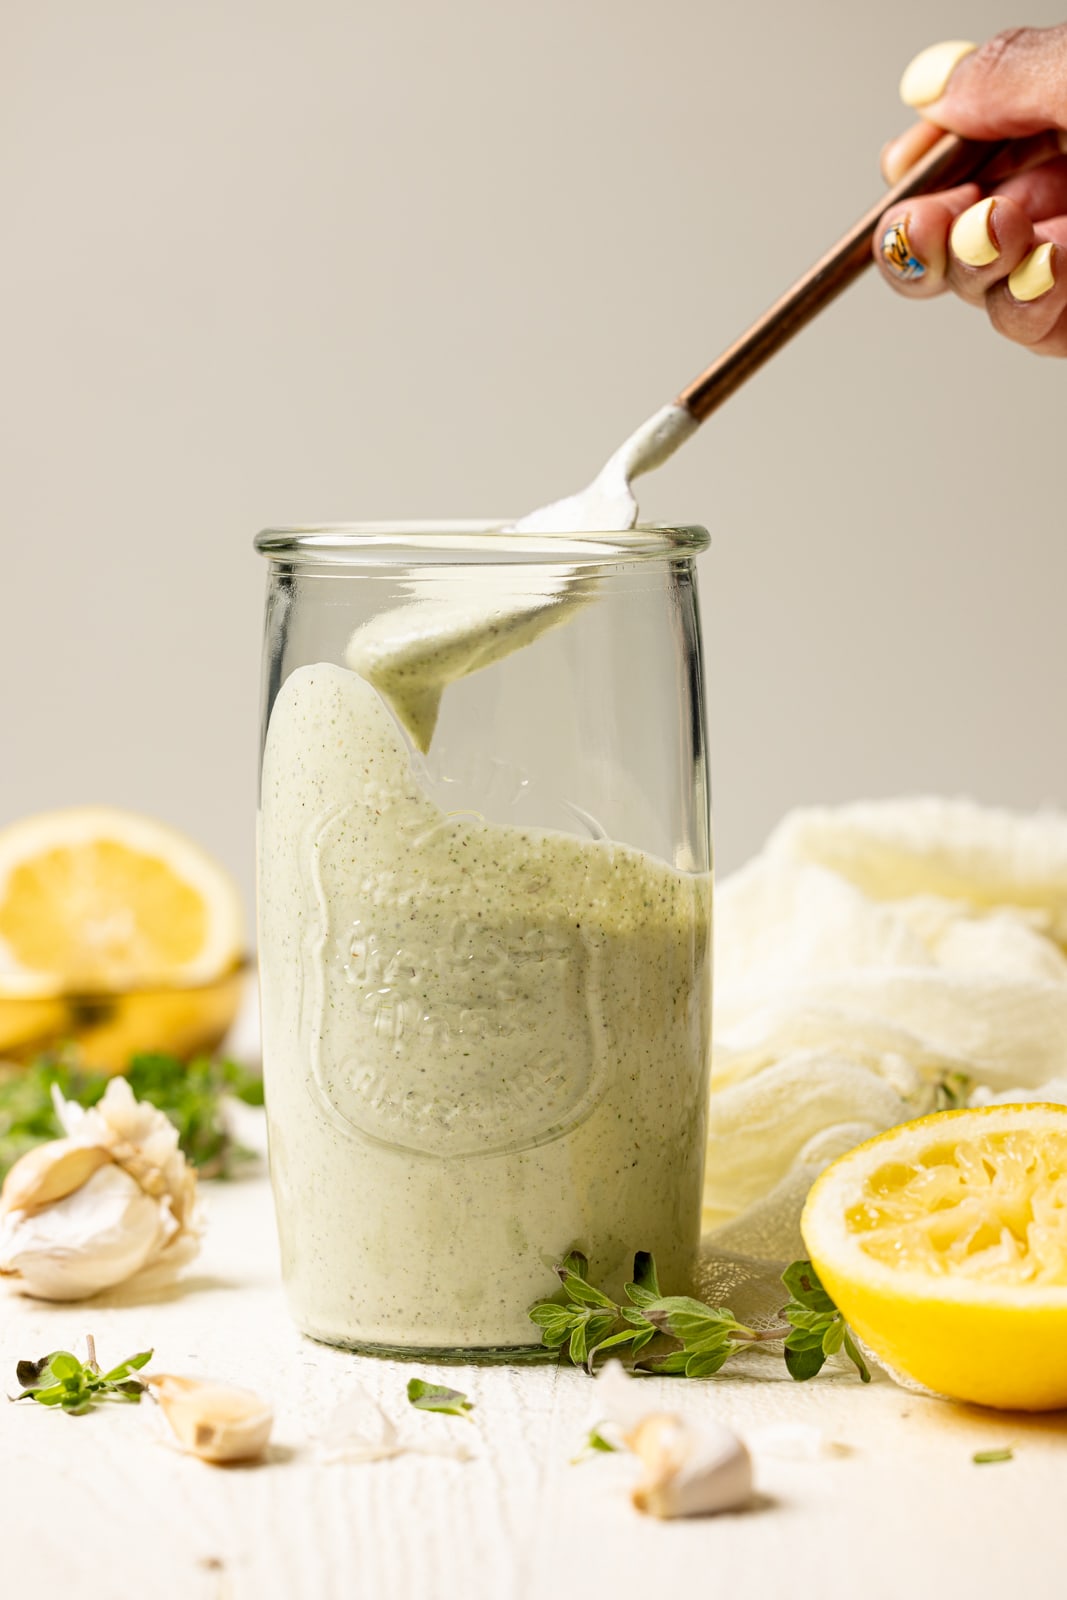 Lemon garlic dressing in a mason jar being scooped up using a spoon on a white table.